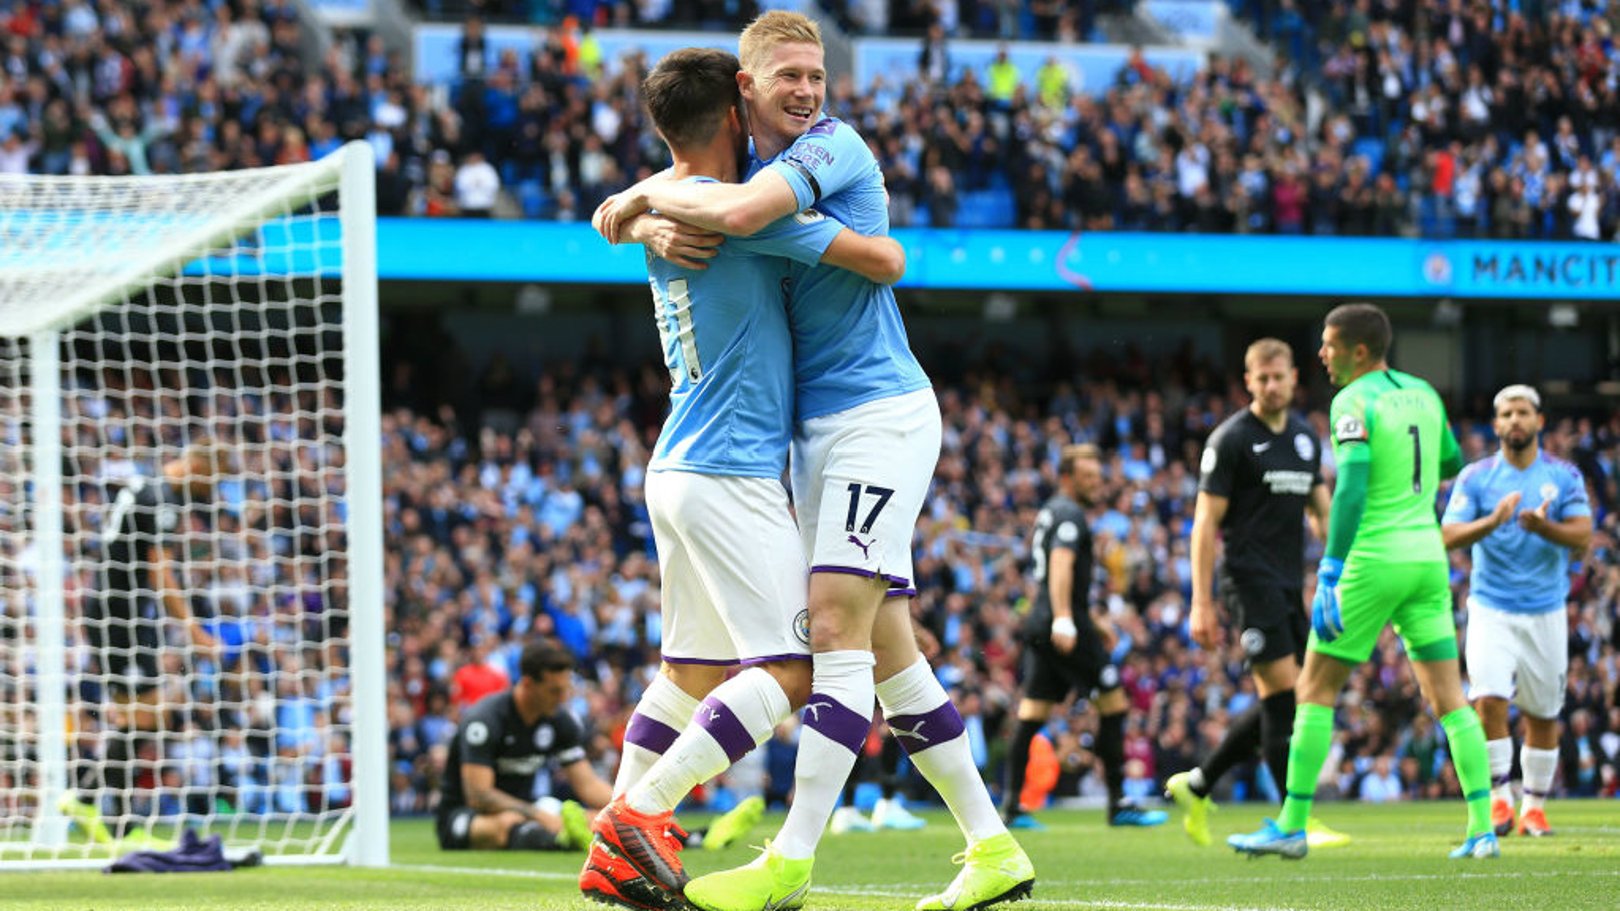 De Bruyne never doubted strong comeback